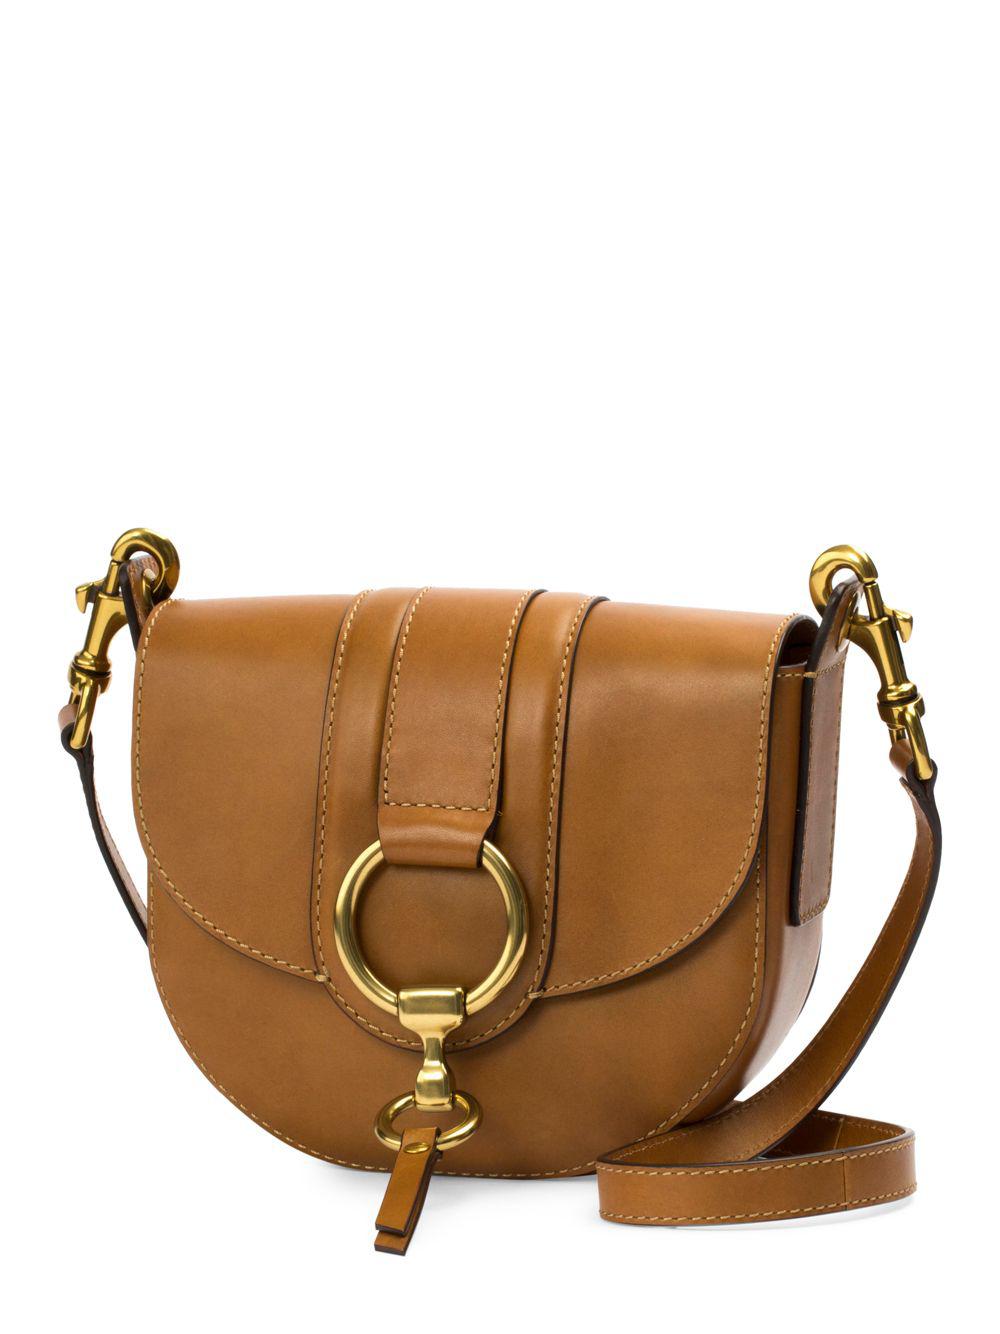 Frye Harness Leather Tote Bag | IUCN Water